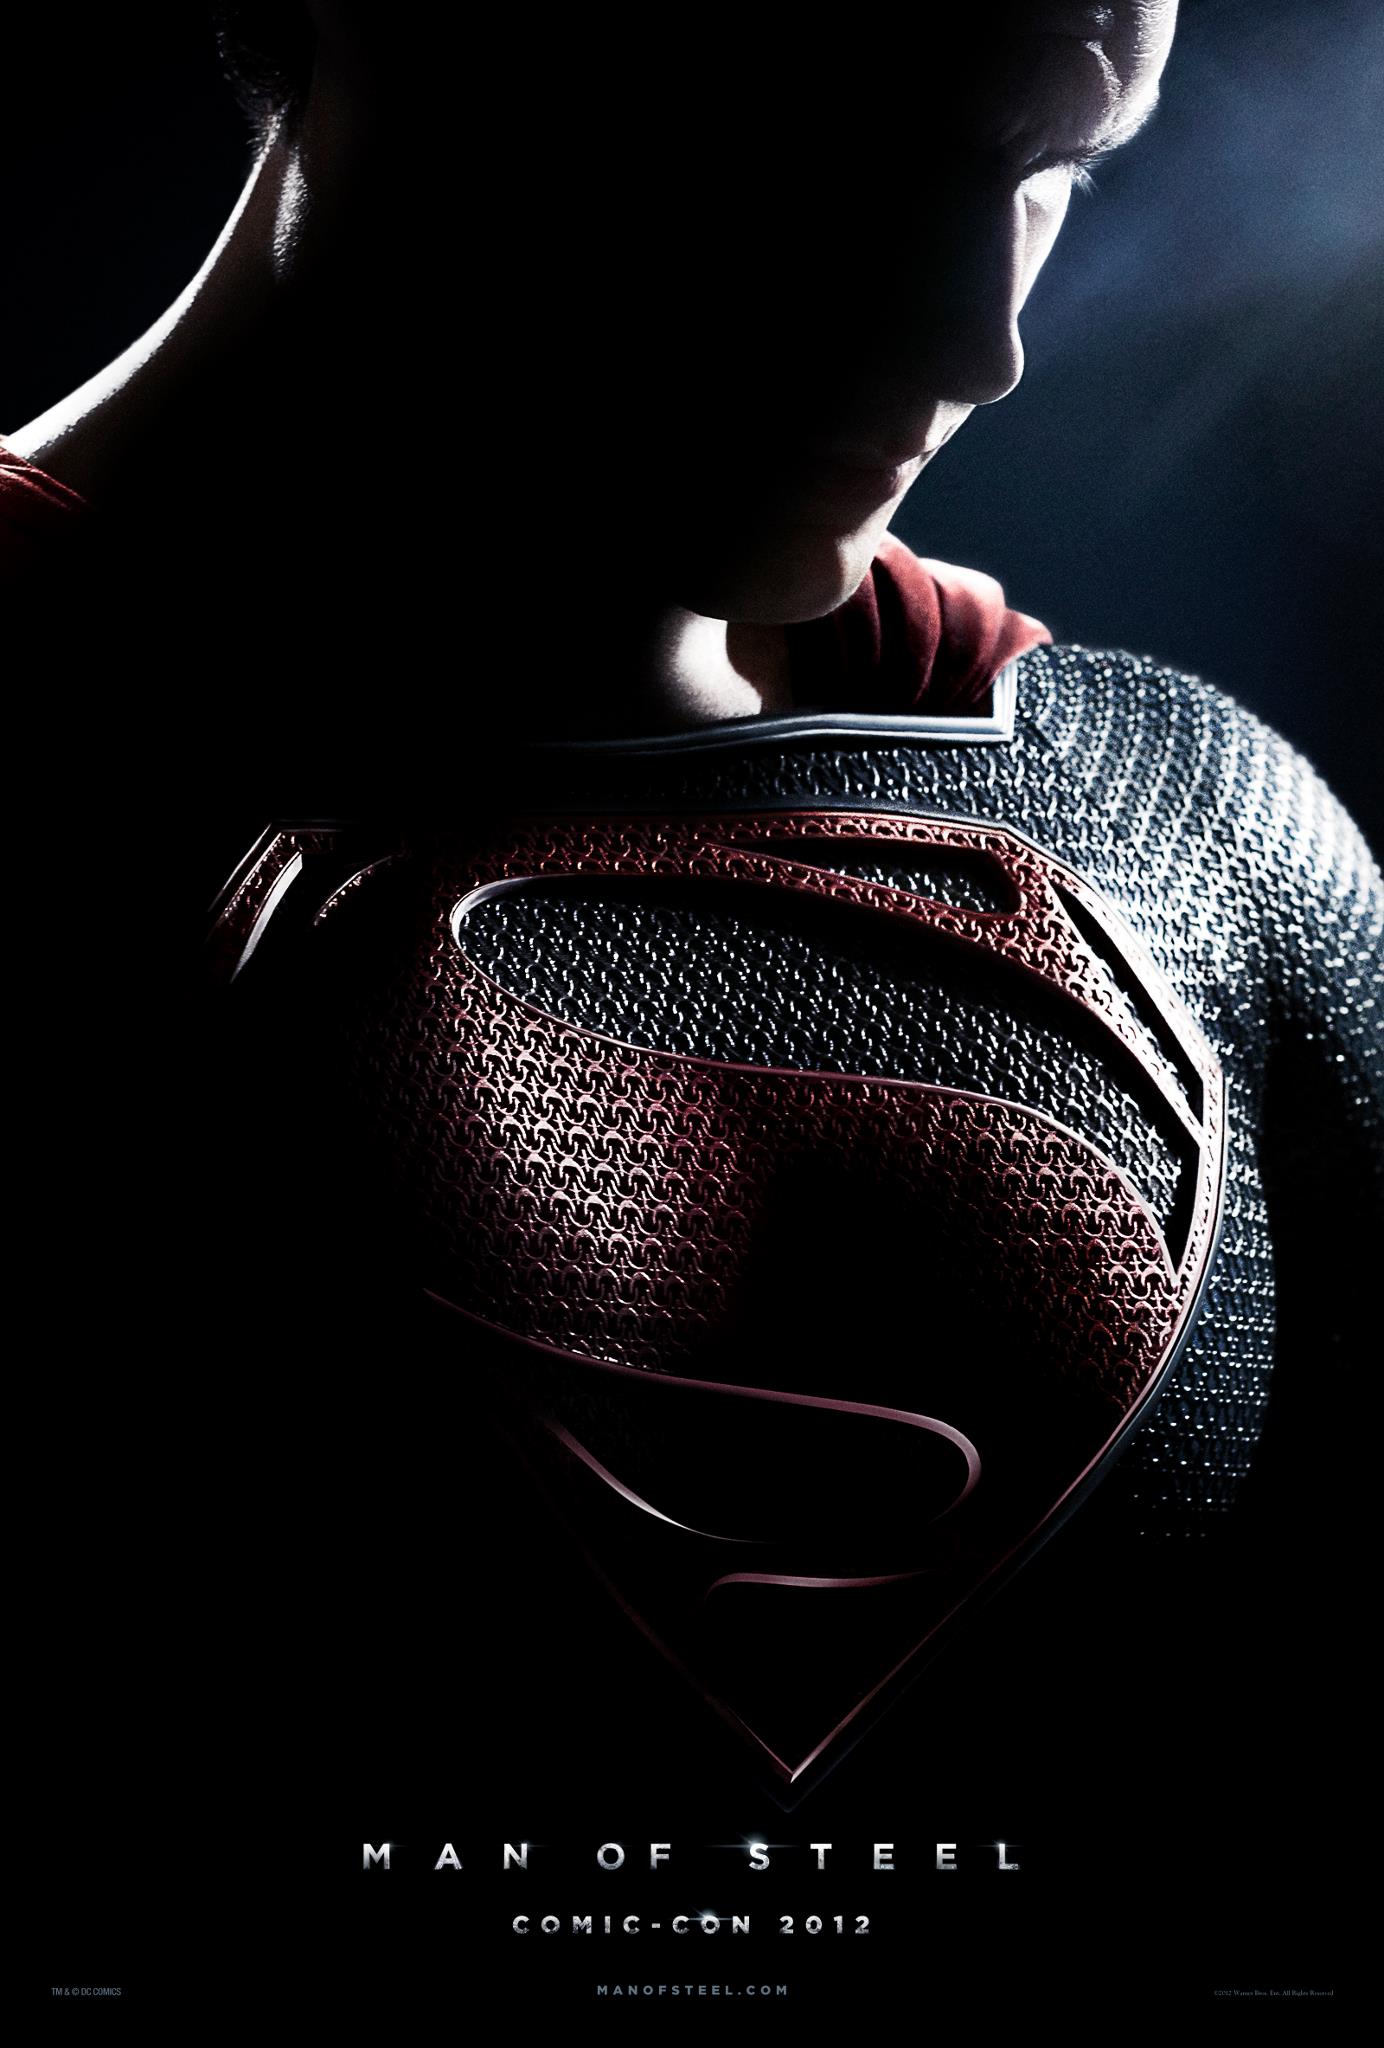 First Teaser Poster For Zack Snyder's 'Man of Steel' Featuring Henry Cavill